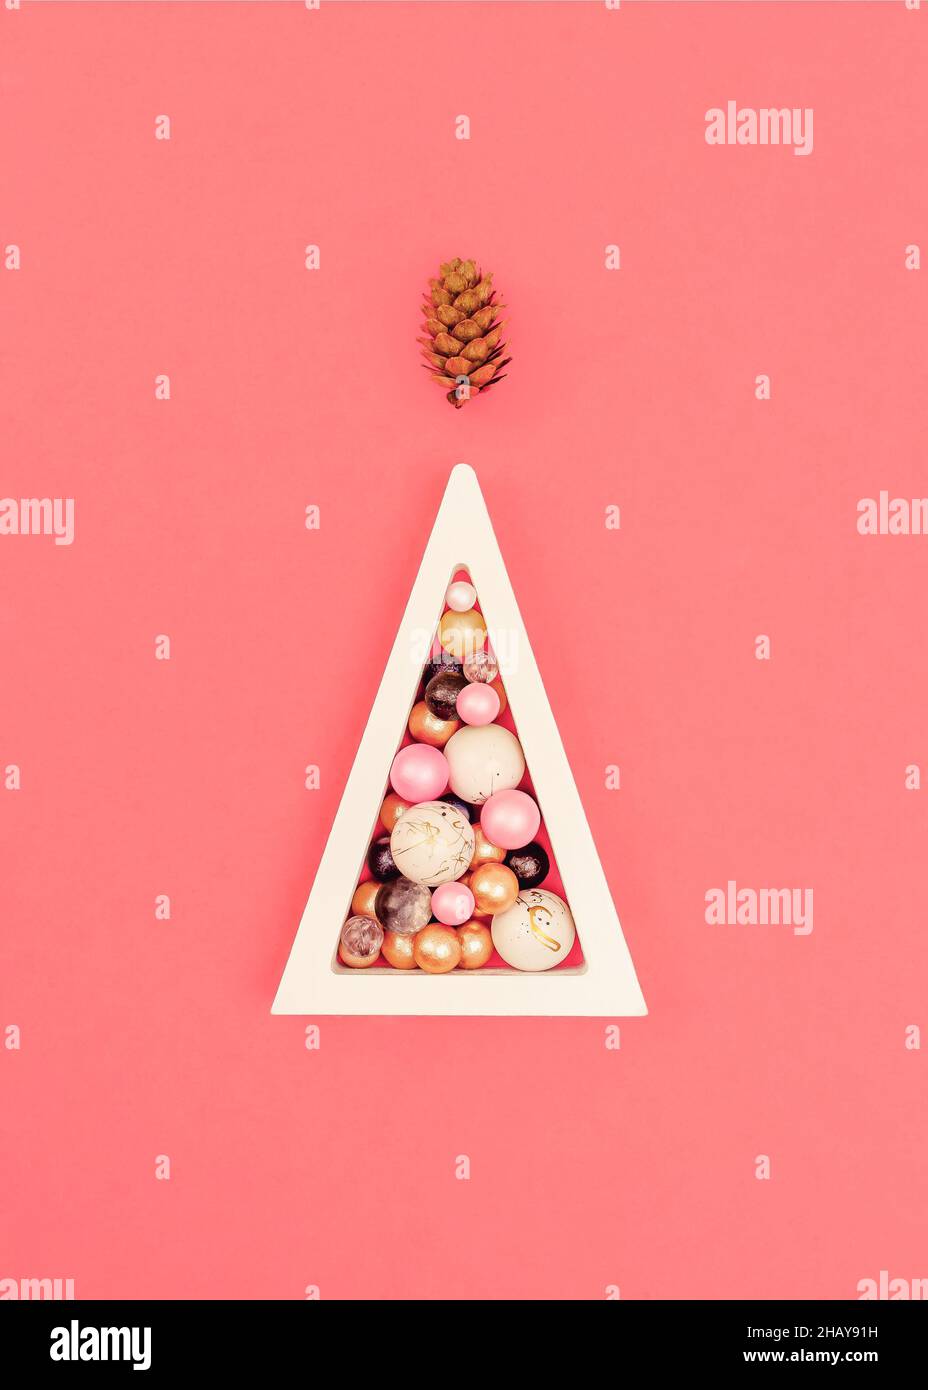 Abstract Christmas tree concept. A wooden white triangle with colorful balls. Marble and pearl balls. A pine cone-like the top of a Christmas tree. Co Stock Photo